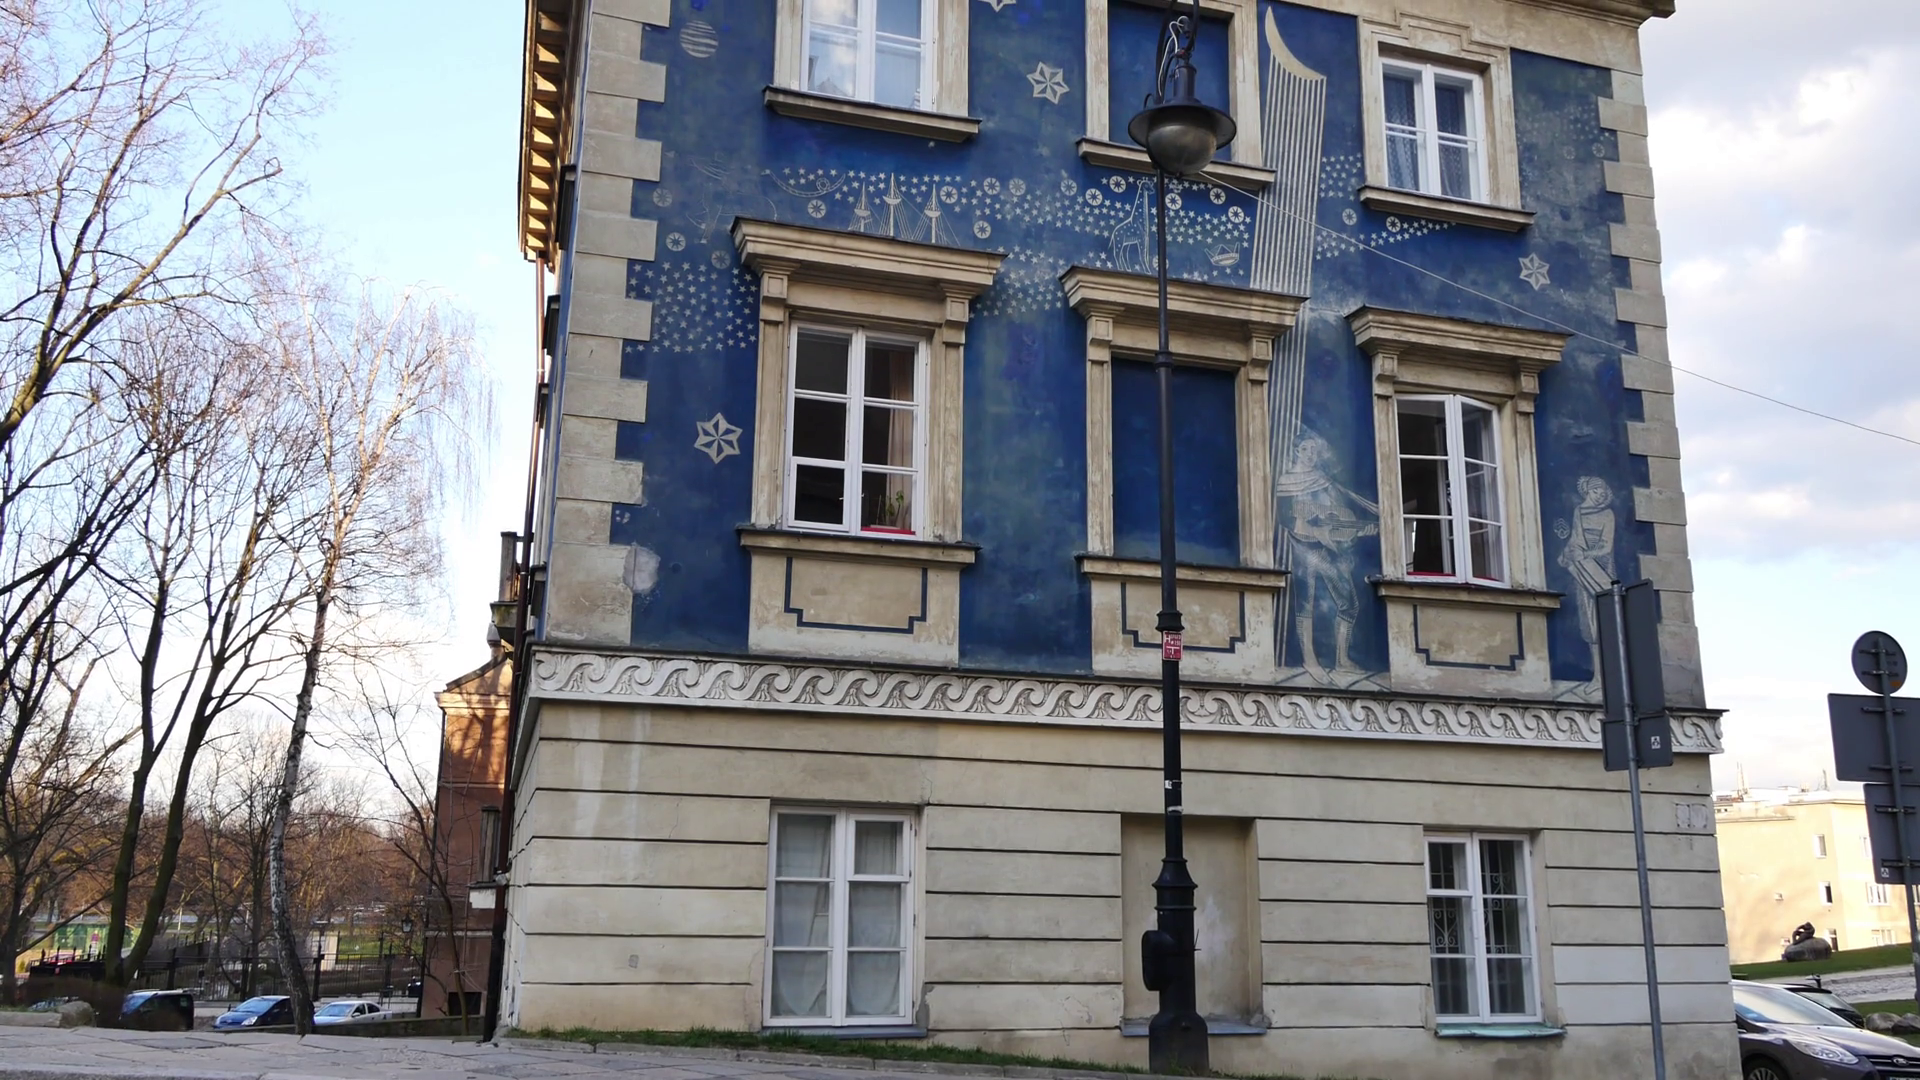 Old Town in Warsaw, capitol of Poland. Old tenement house with ...